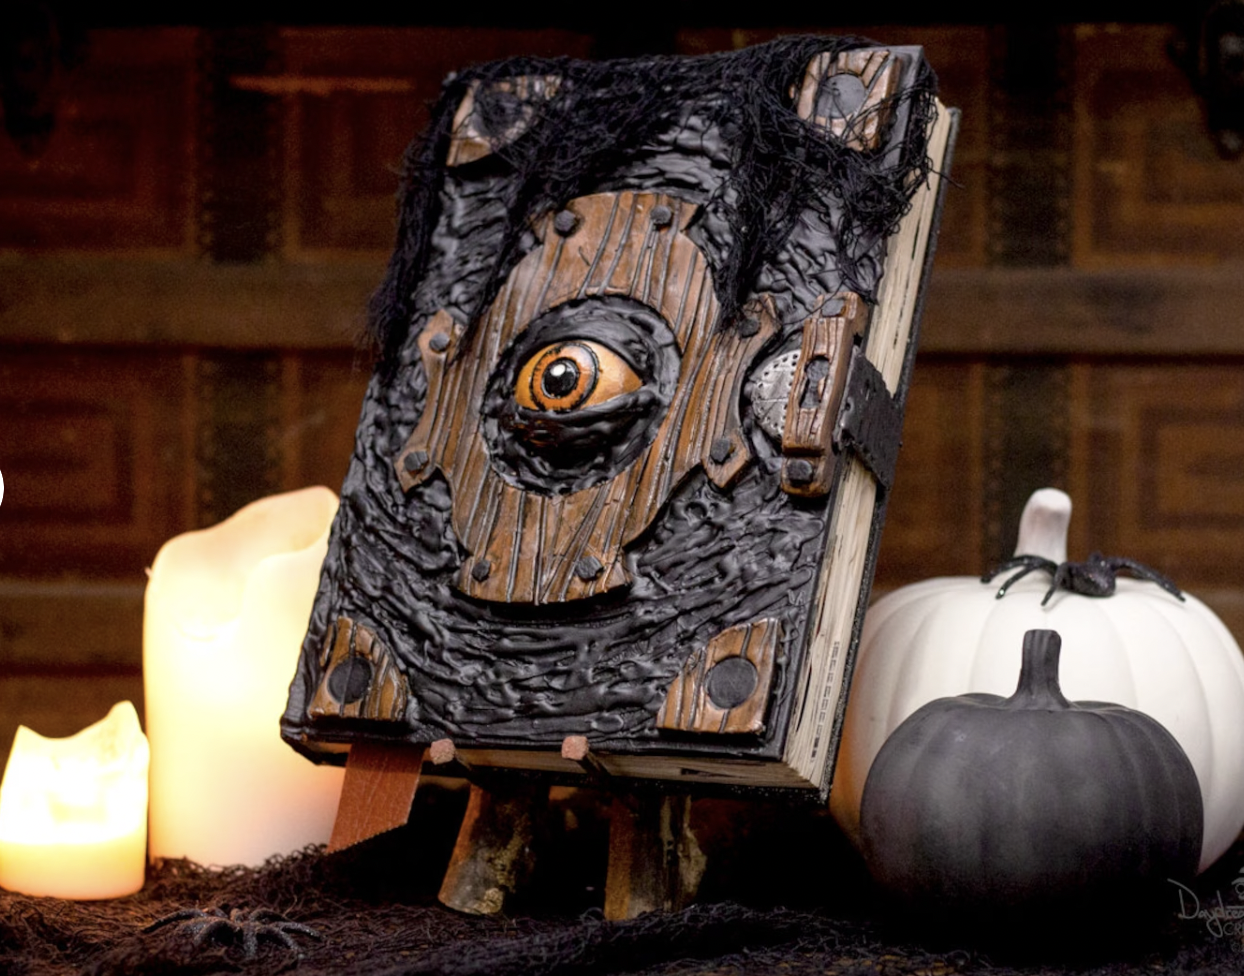 A fake wooden spell book with an eye in the center reminiscent of Hocus Pocus 